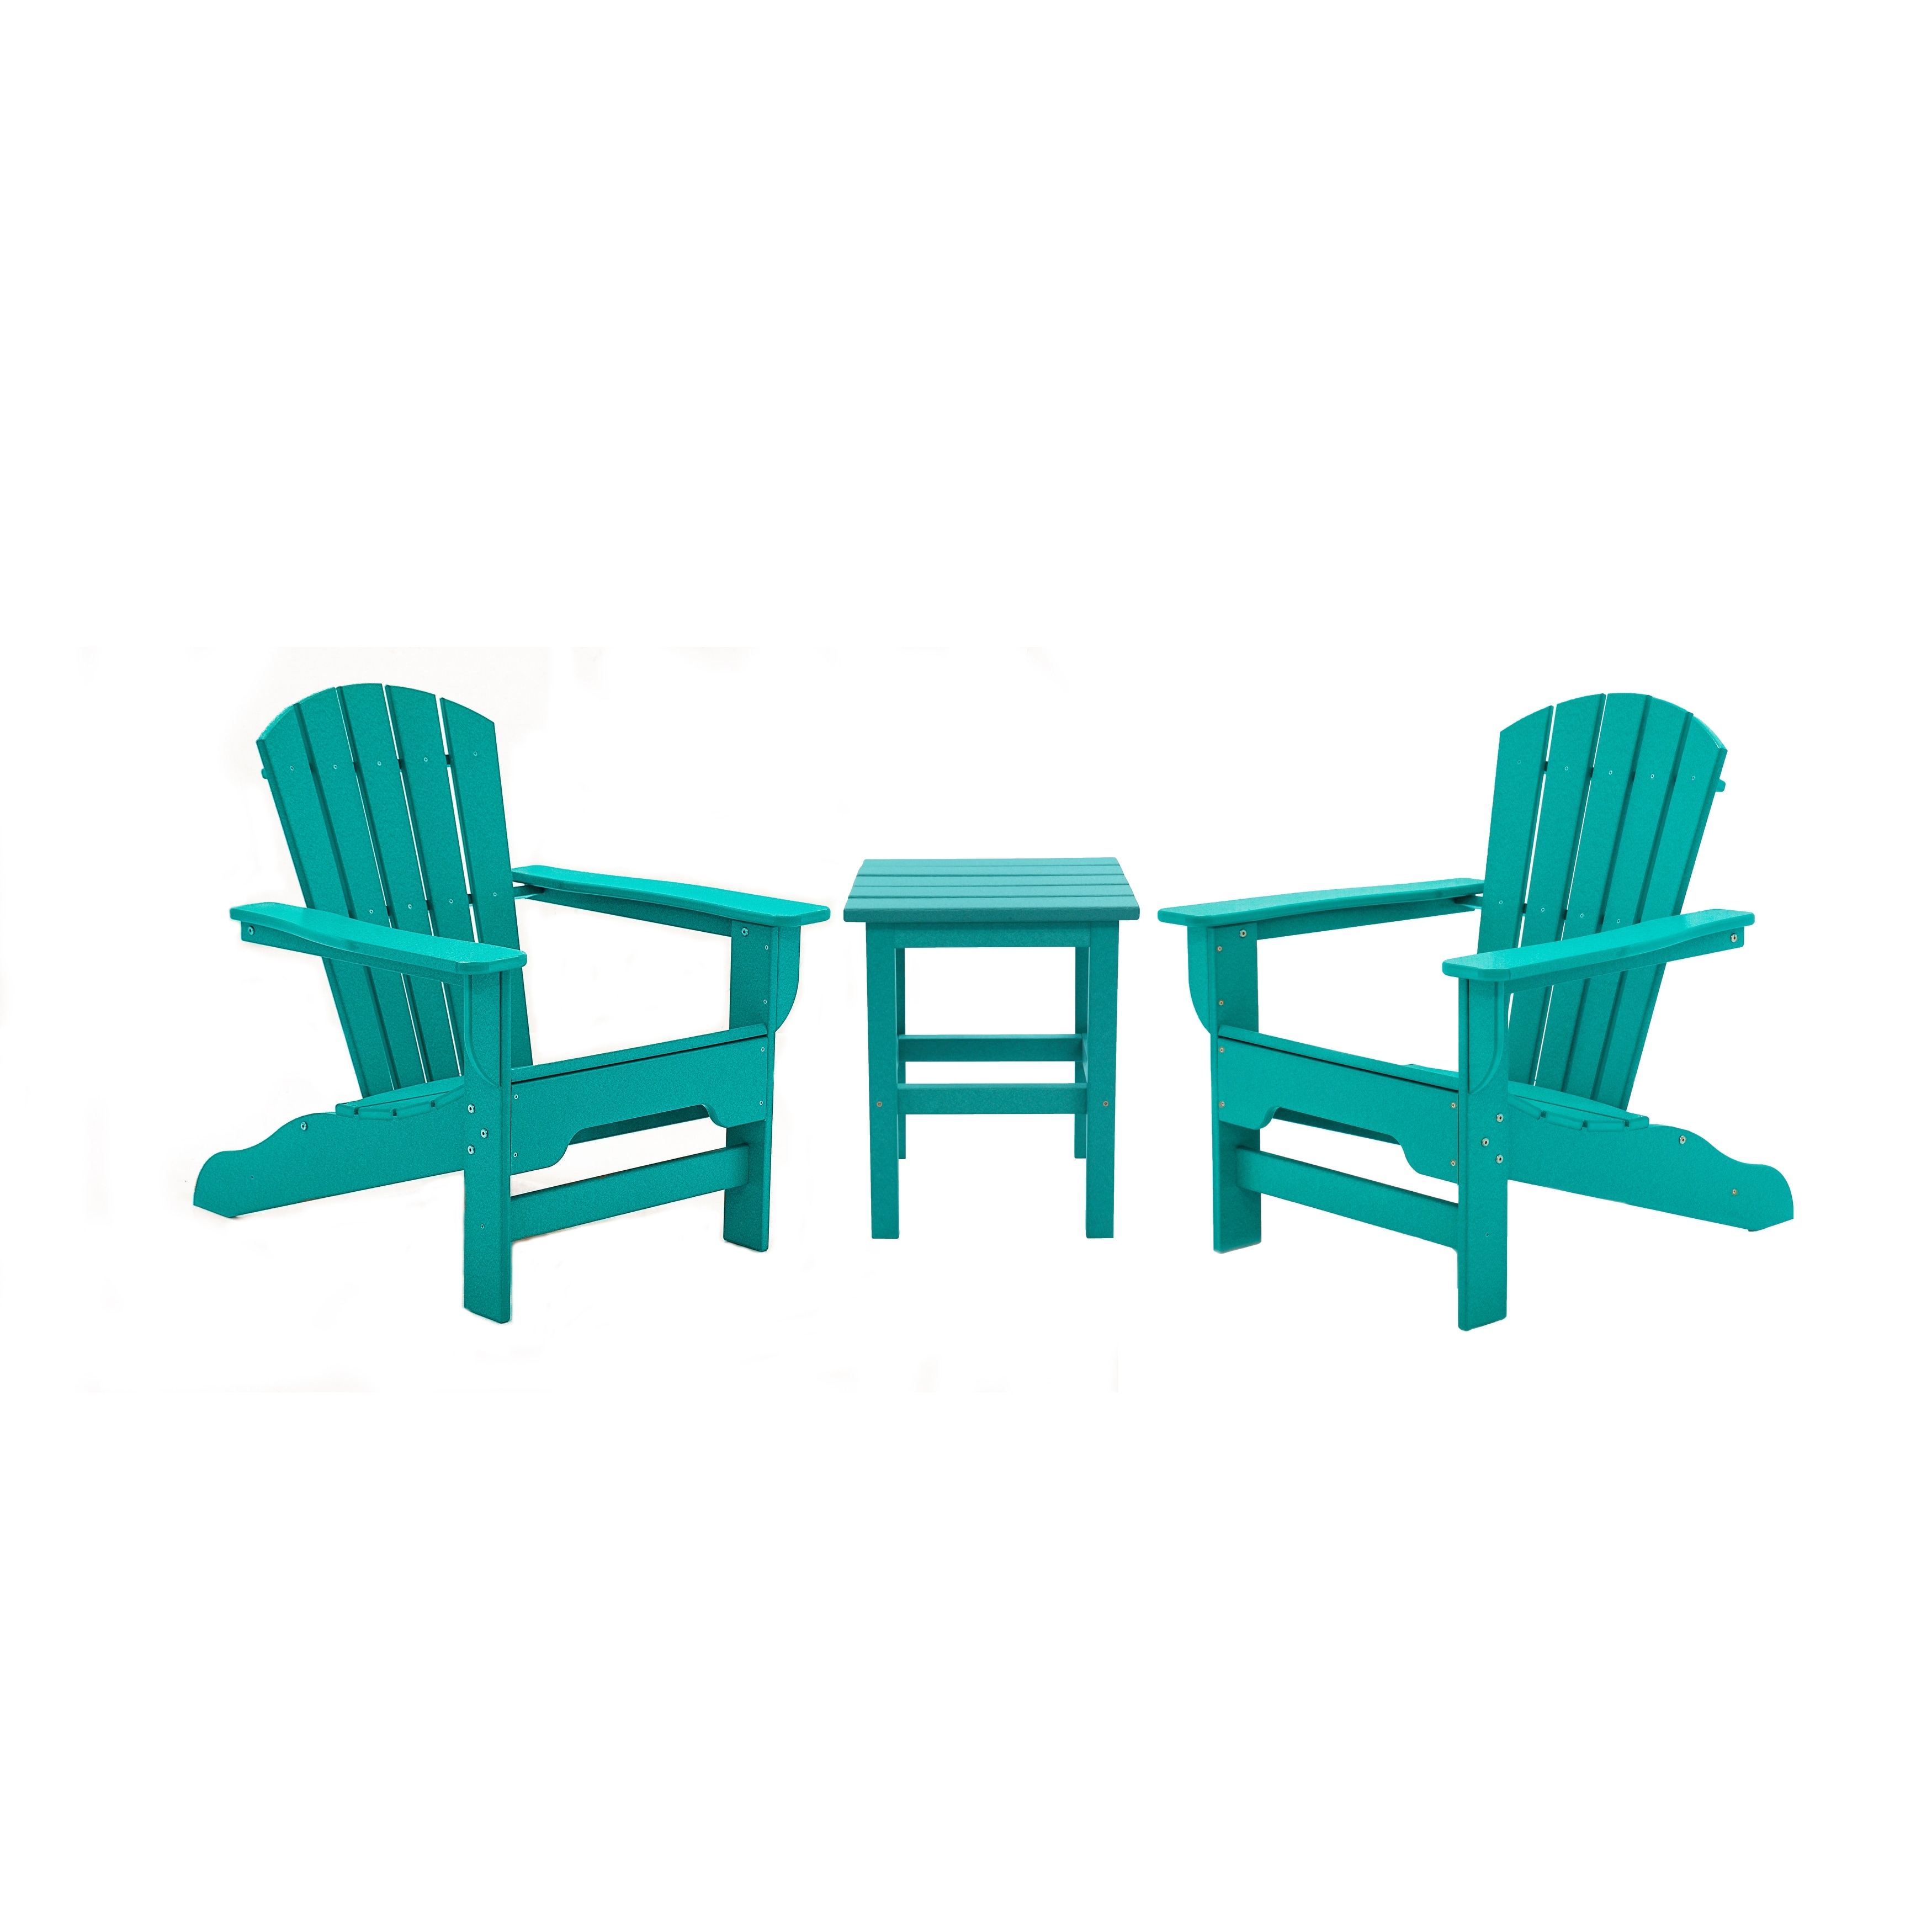 Hawkesbury 3-pc. Fanback Adirondack Chairs w/ Side Table by Havenside Home